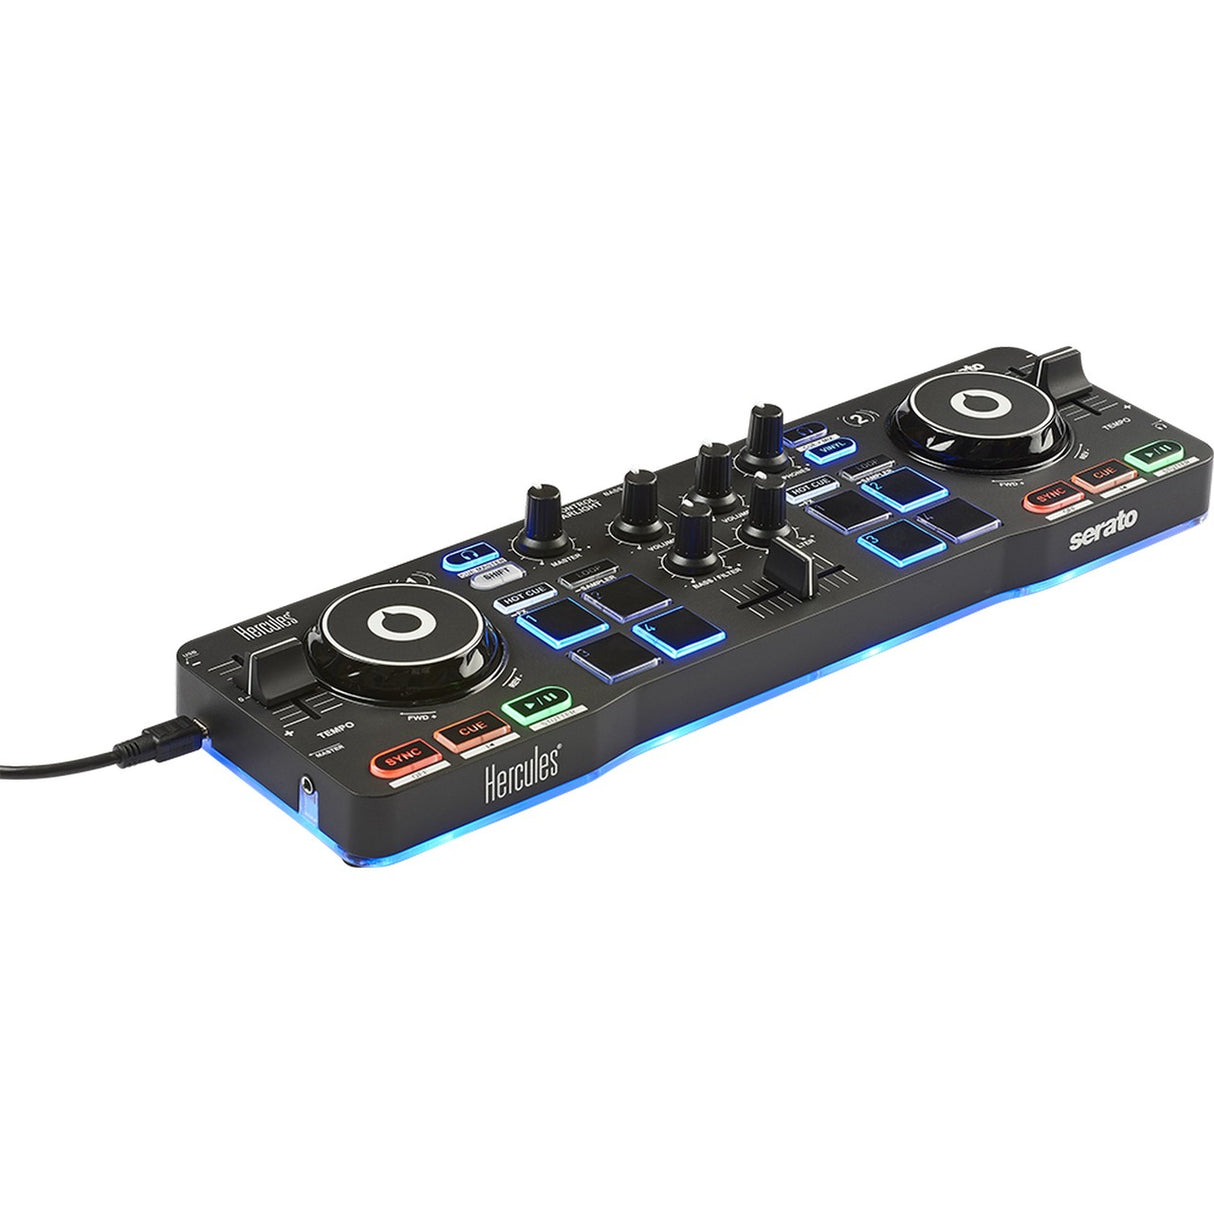 Hercules DJControl Starlight DJ Compact Controller with Built-in Sound Card for Serato